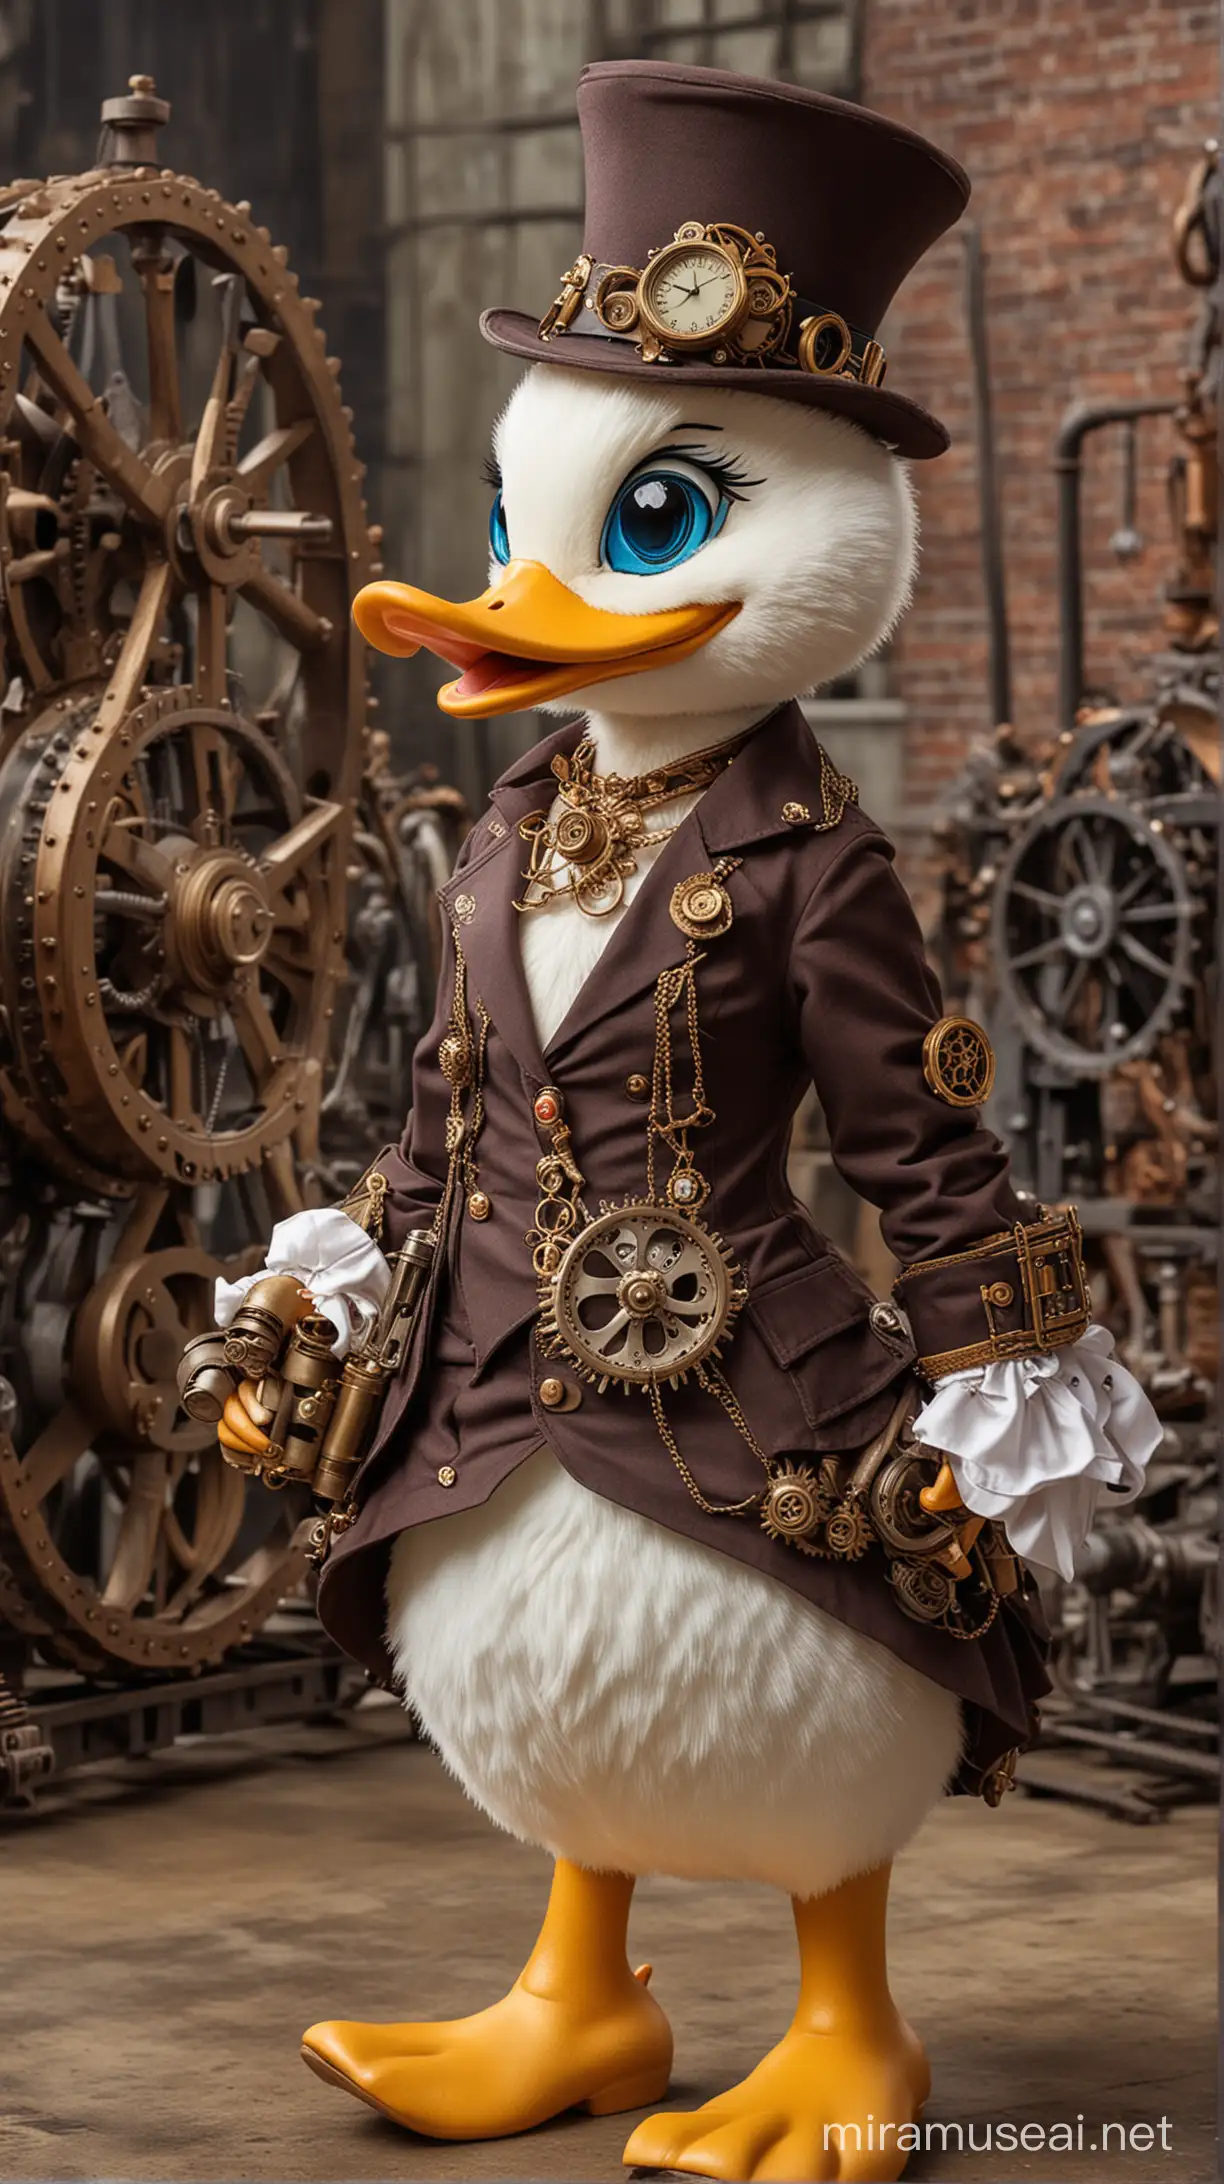 Make a Daisy Duck from Disney dressed in steampunk attire, complete with gears, brass accessories, and Victorian-inspired clothing, set against a backdrop of industrial machinery and clockwork marvels."